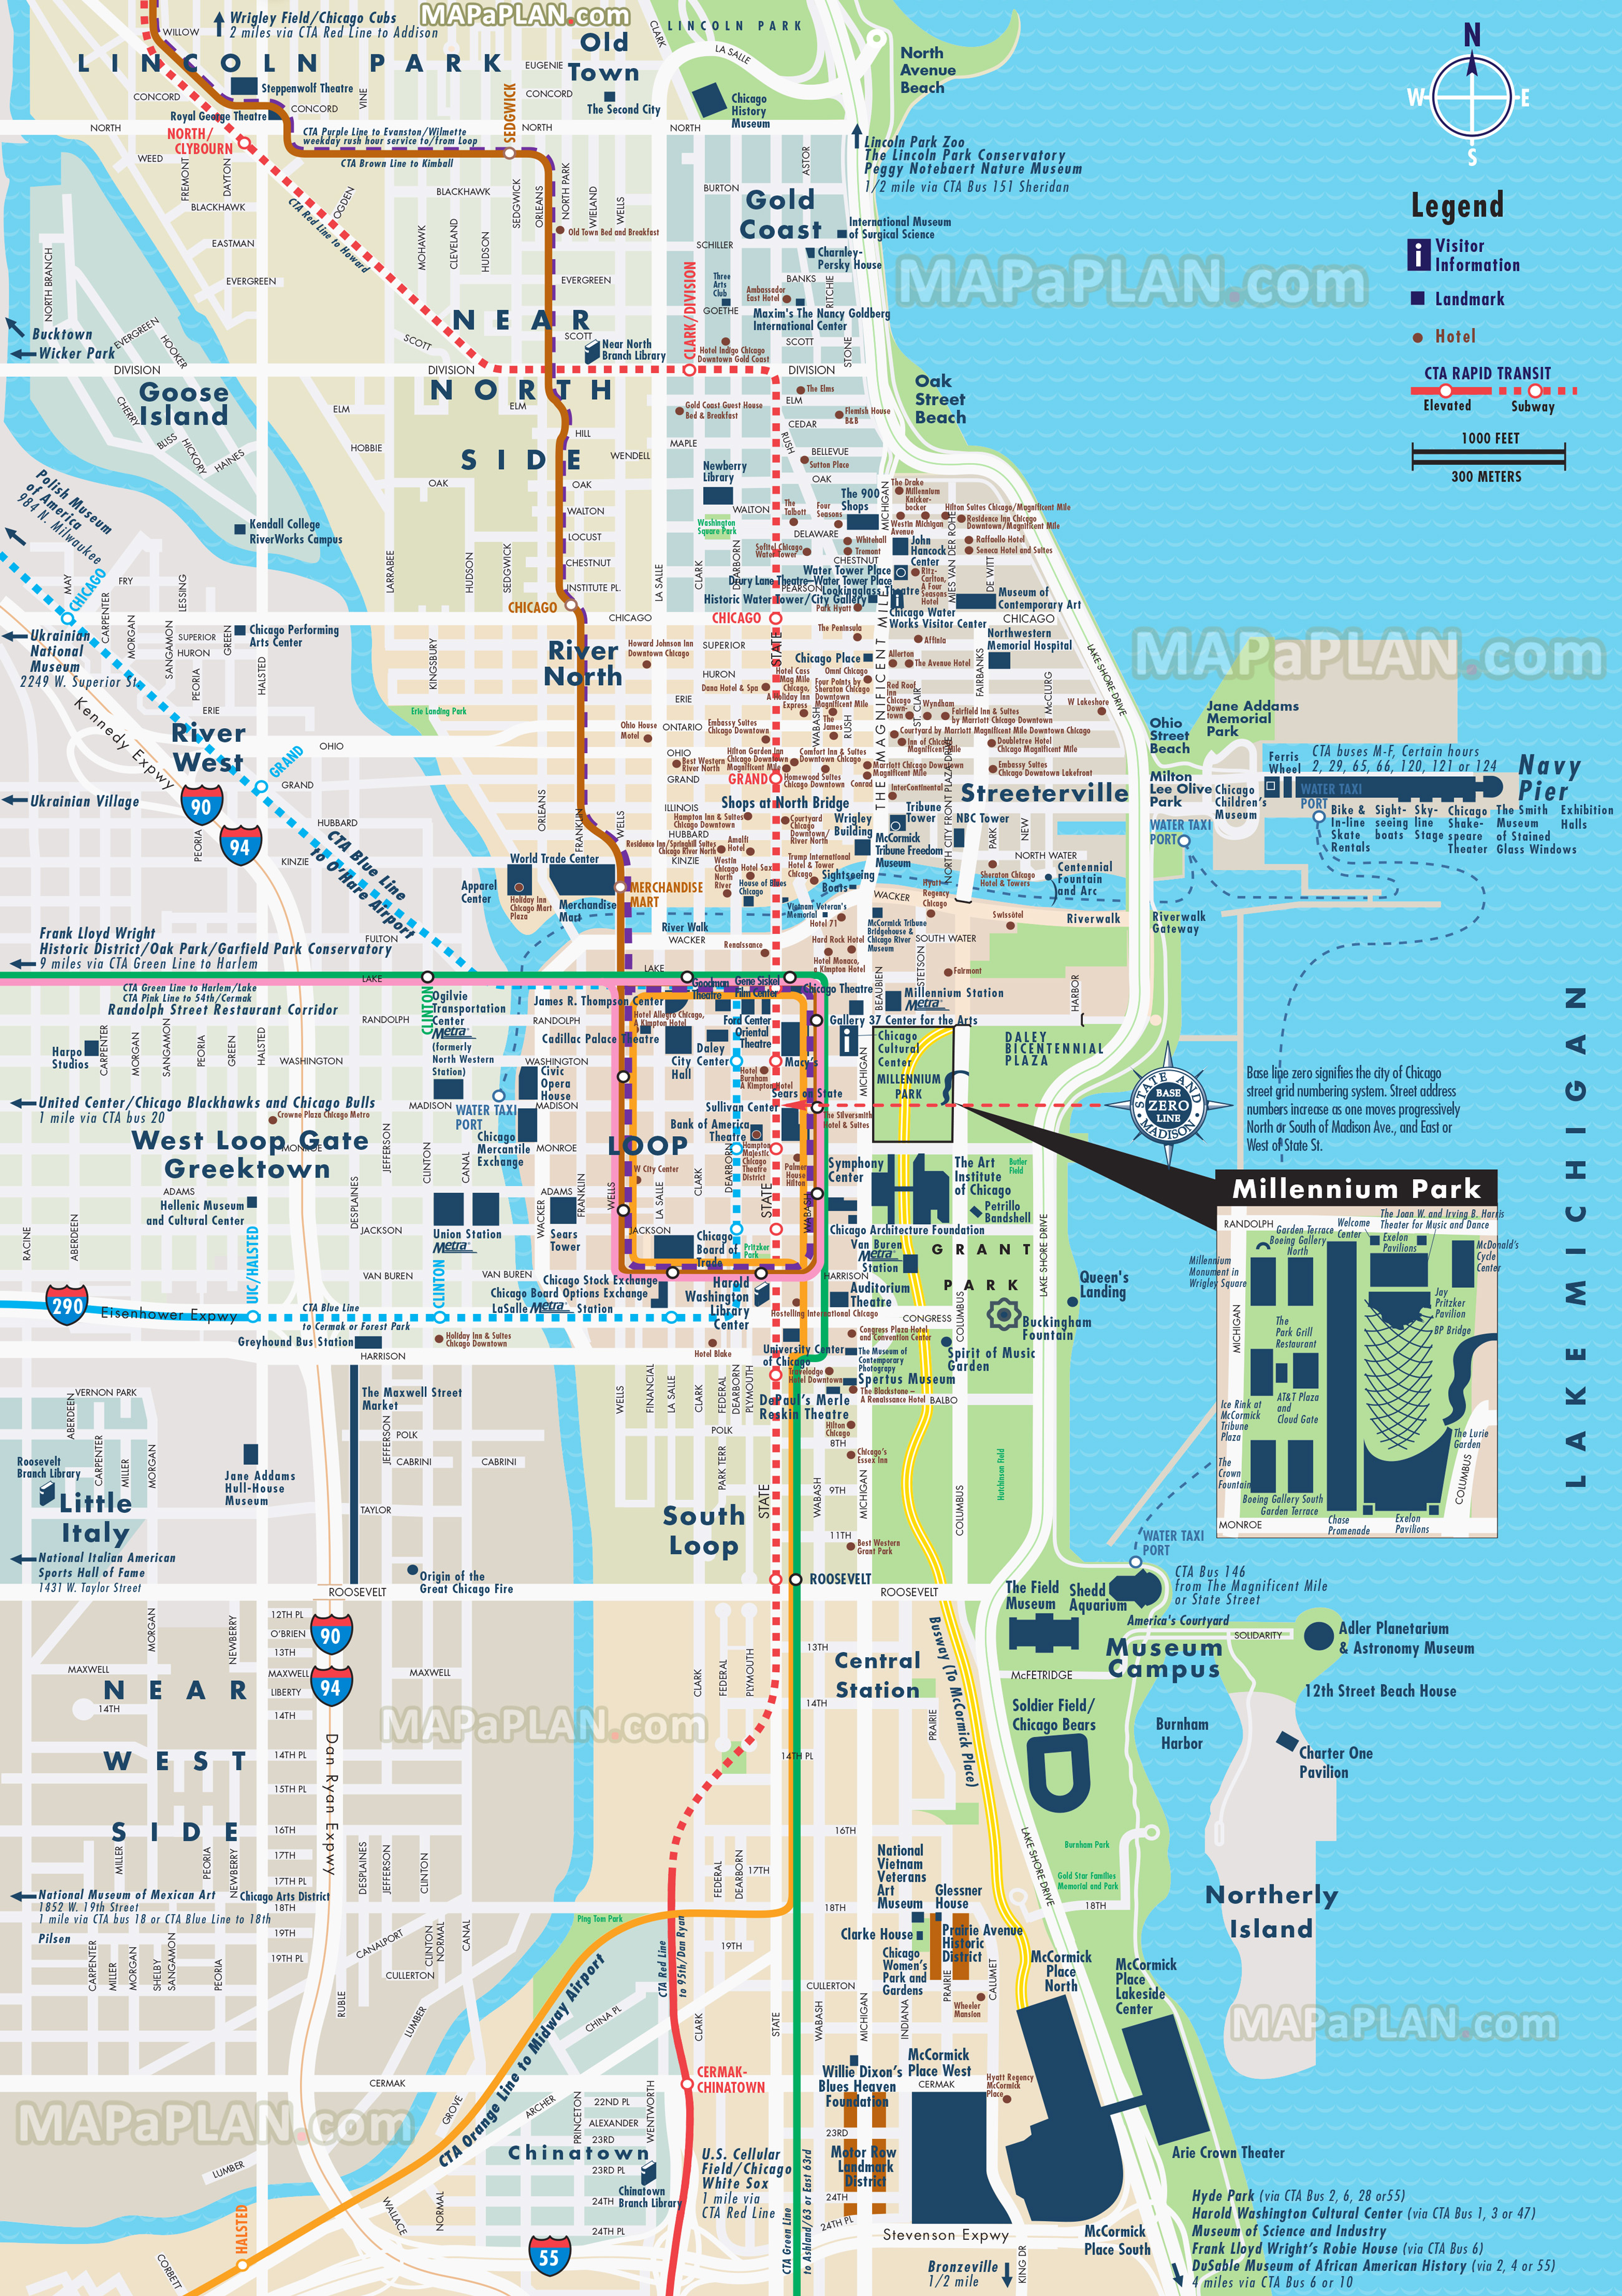 street road names plan central most popular points of interest elevated metra transport stops Millennium Park Old Town Chicago top tourist attractions map